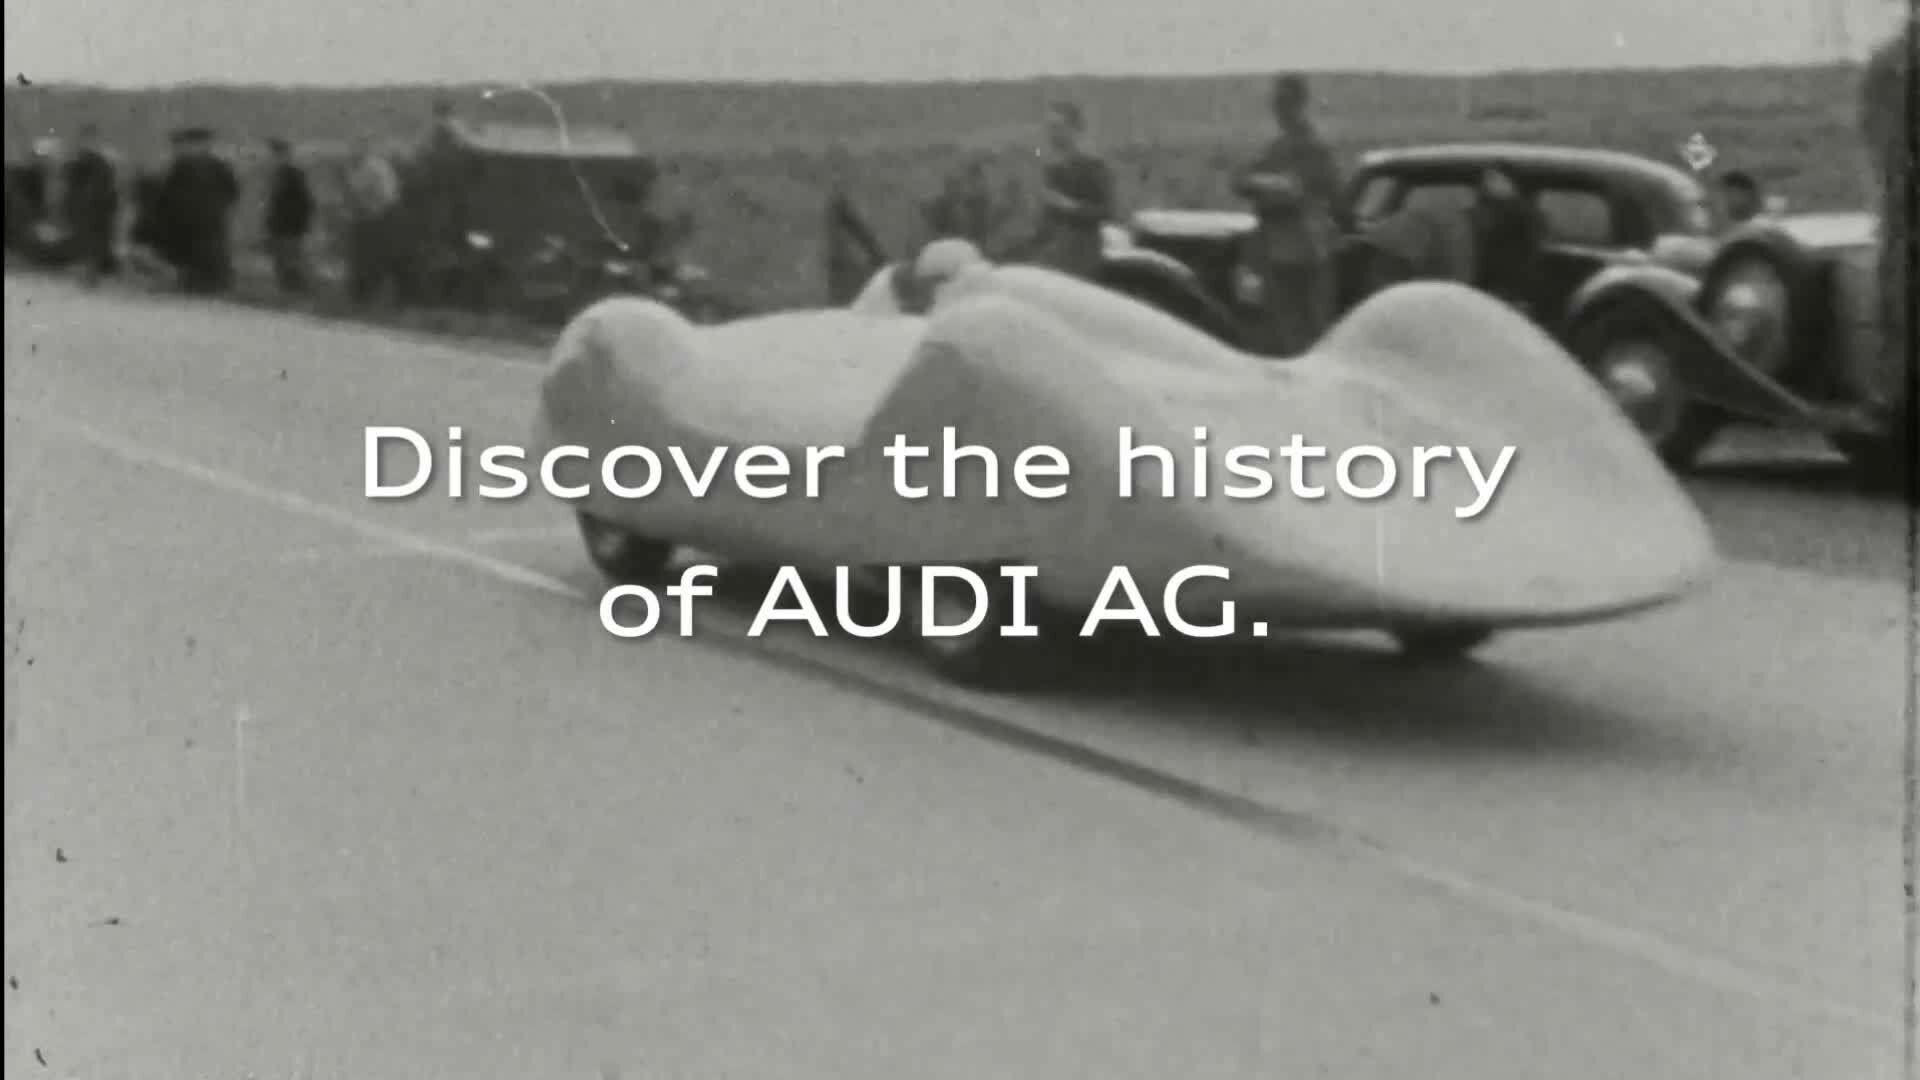 Audi Tradition: a story of the automobile